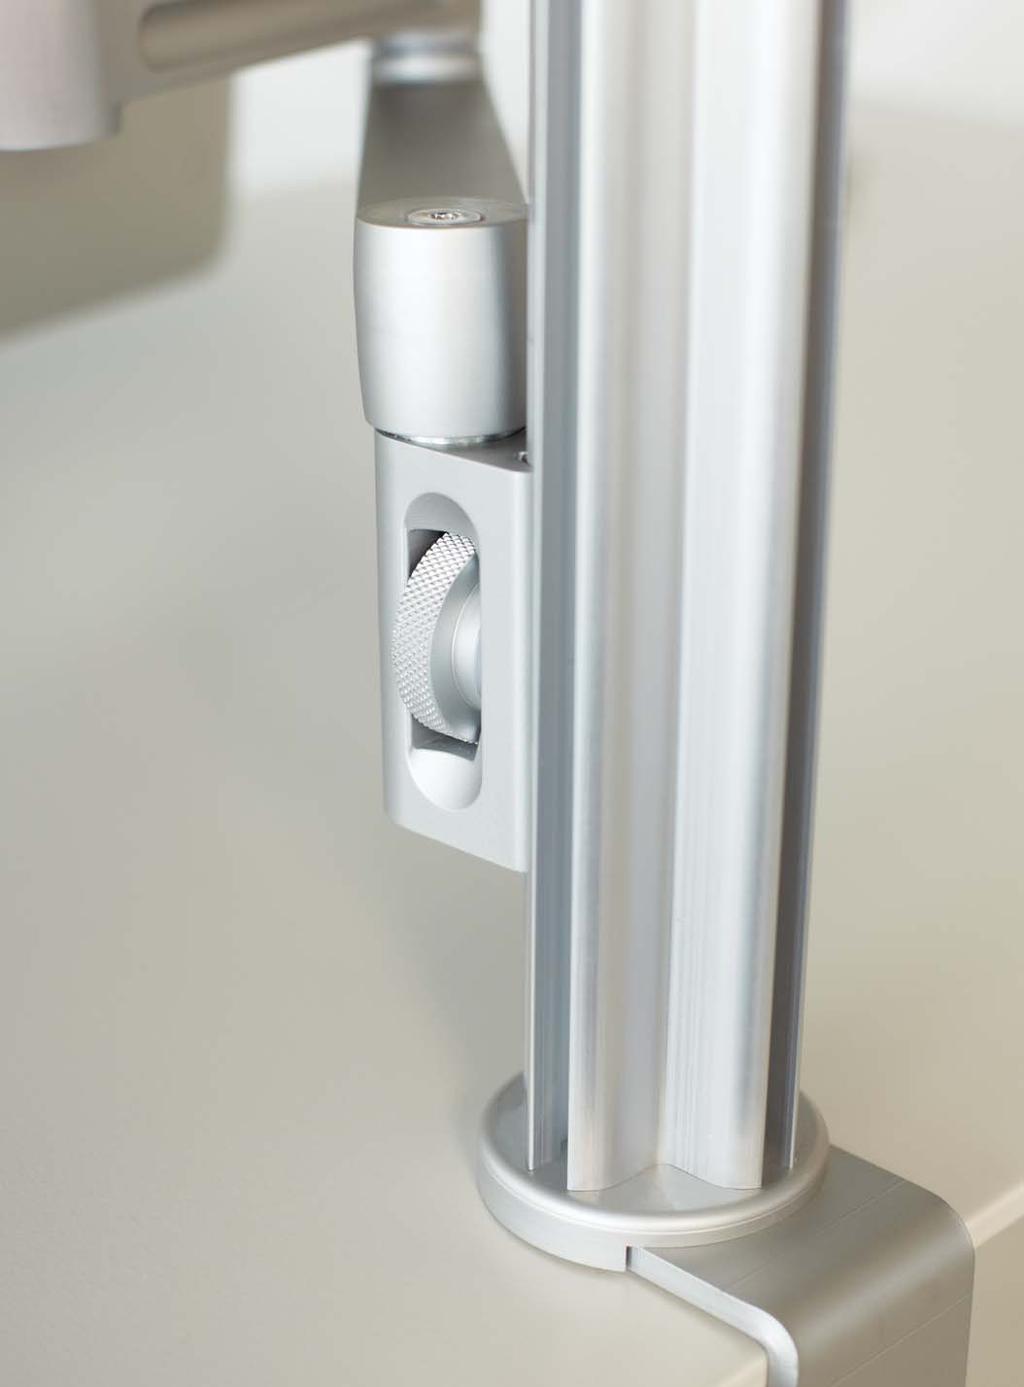 A SLEEK WIRE MANAGEMENT COLUMN CONCEALS CABLES FROM THE ARM TO THE WORKSURFACE.